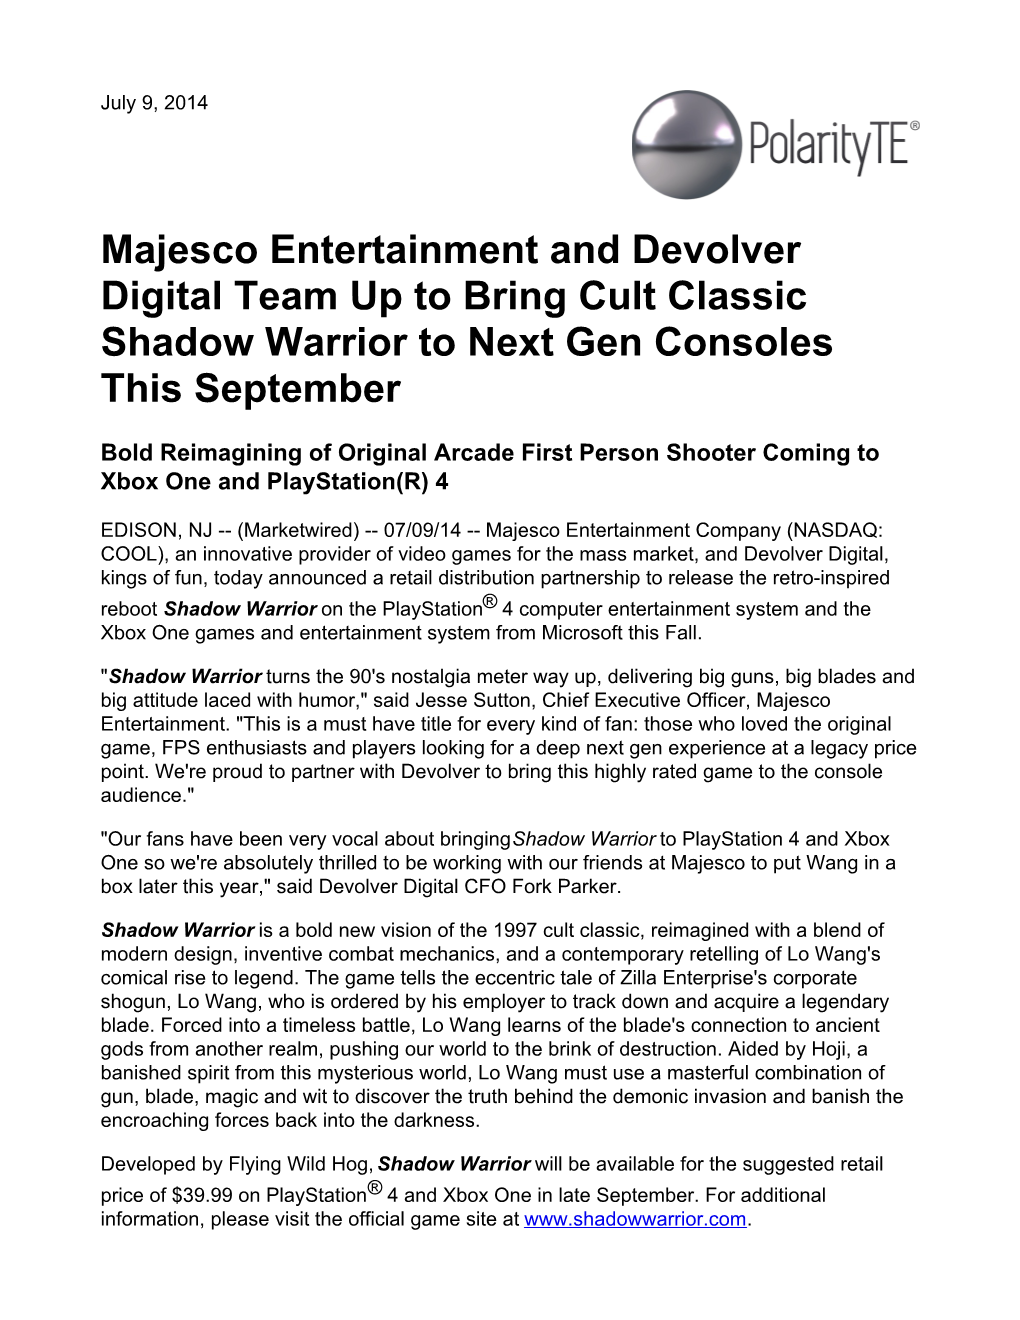 Majesco Entertainment and Devolver Digital Team up to Bring Cult Classic Shadow Warrior to Next Gen Consoles This September